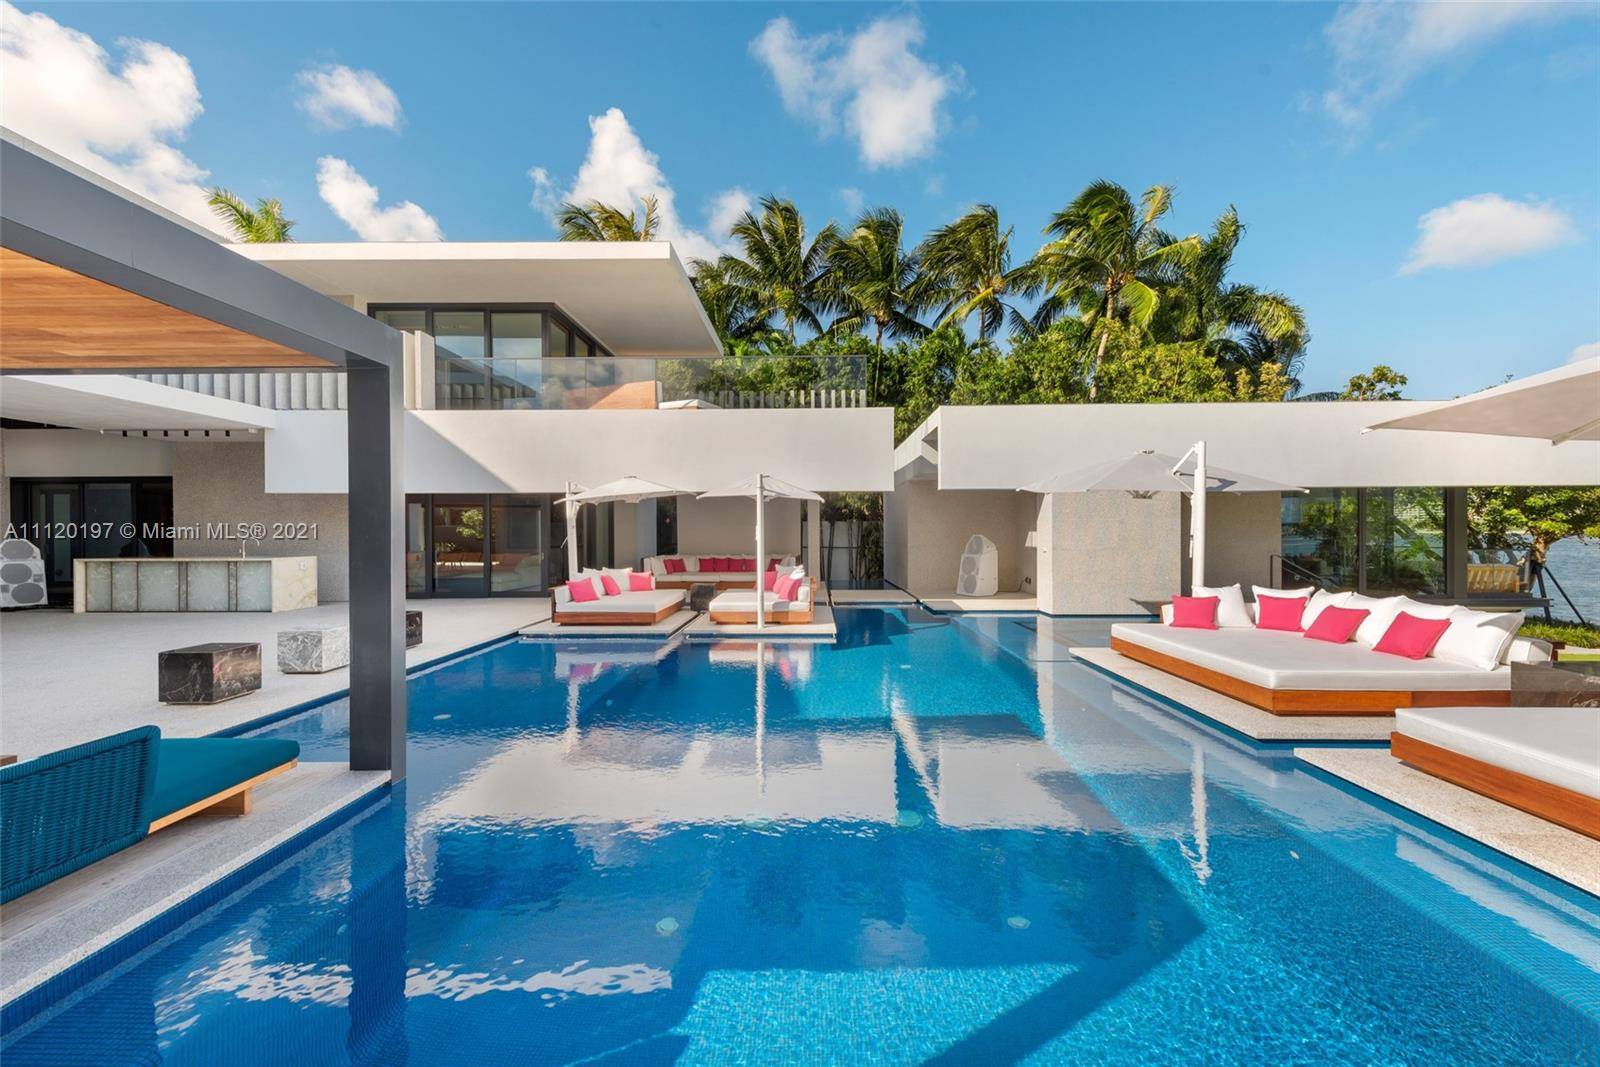 New home on Star Island, Miami s most coveted address.